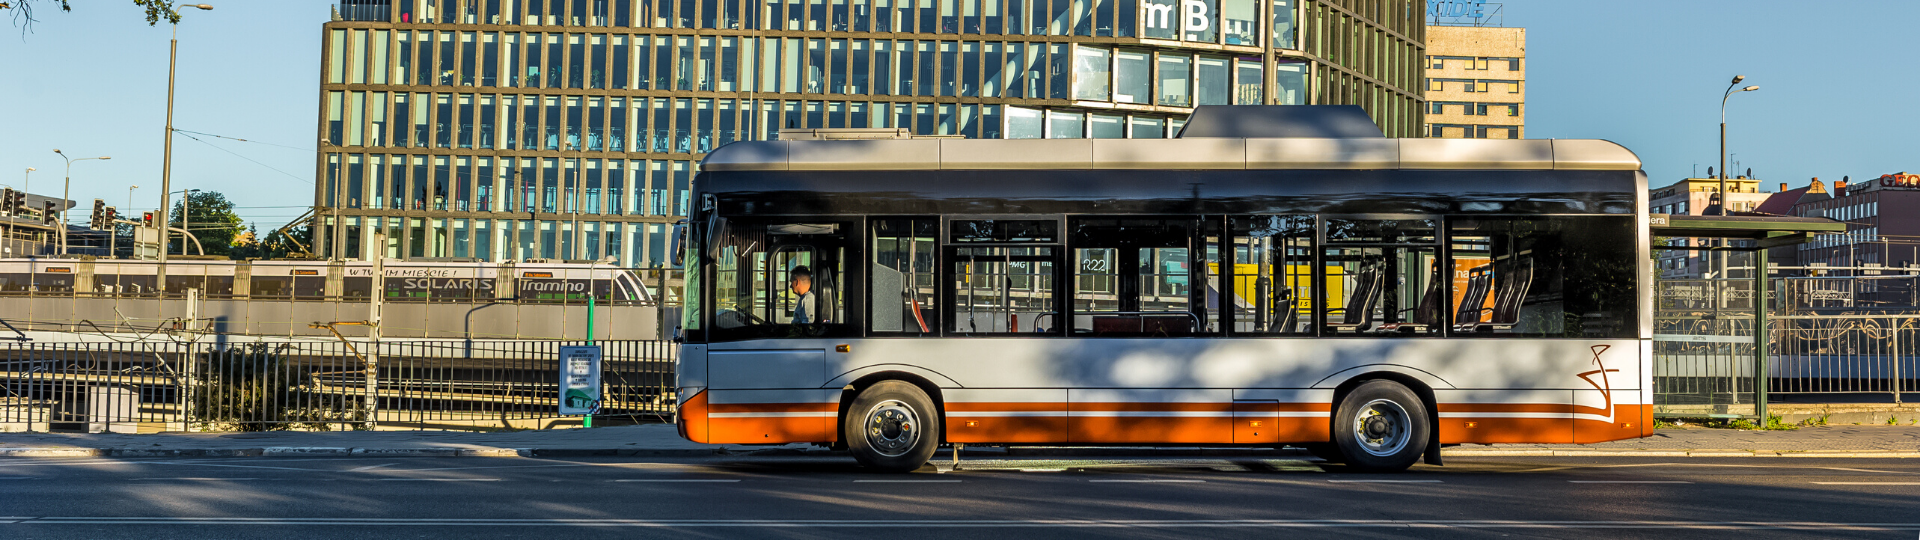 Solaris is going to supply emission-free buses to Bolesławiec